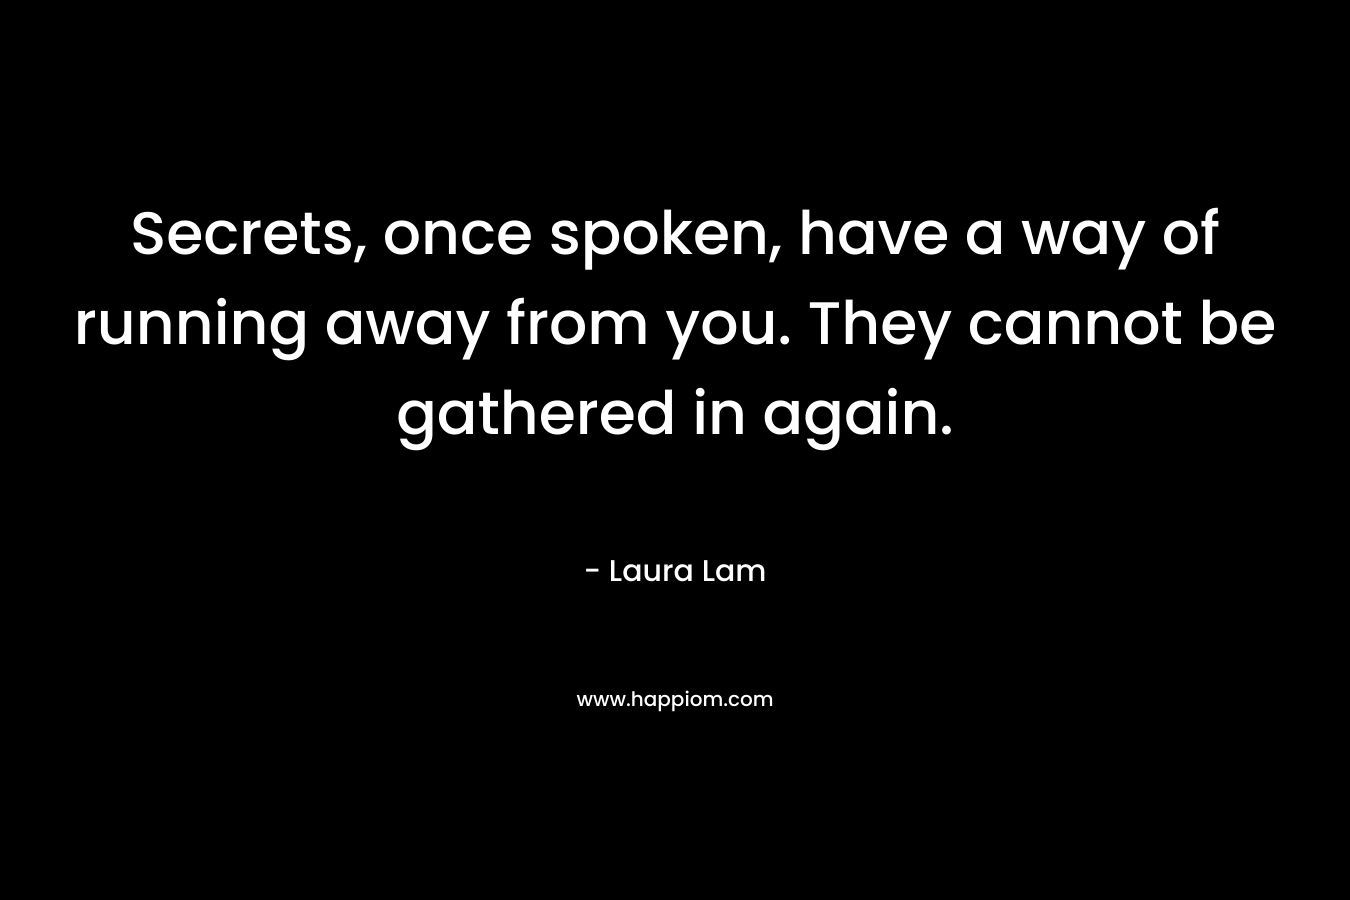 Secrets, once spoken, have a way of running away from you. They cannot be gathered in again.